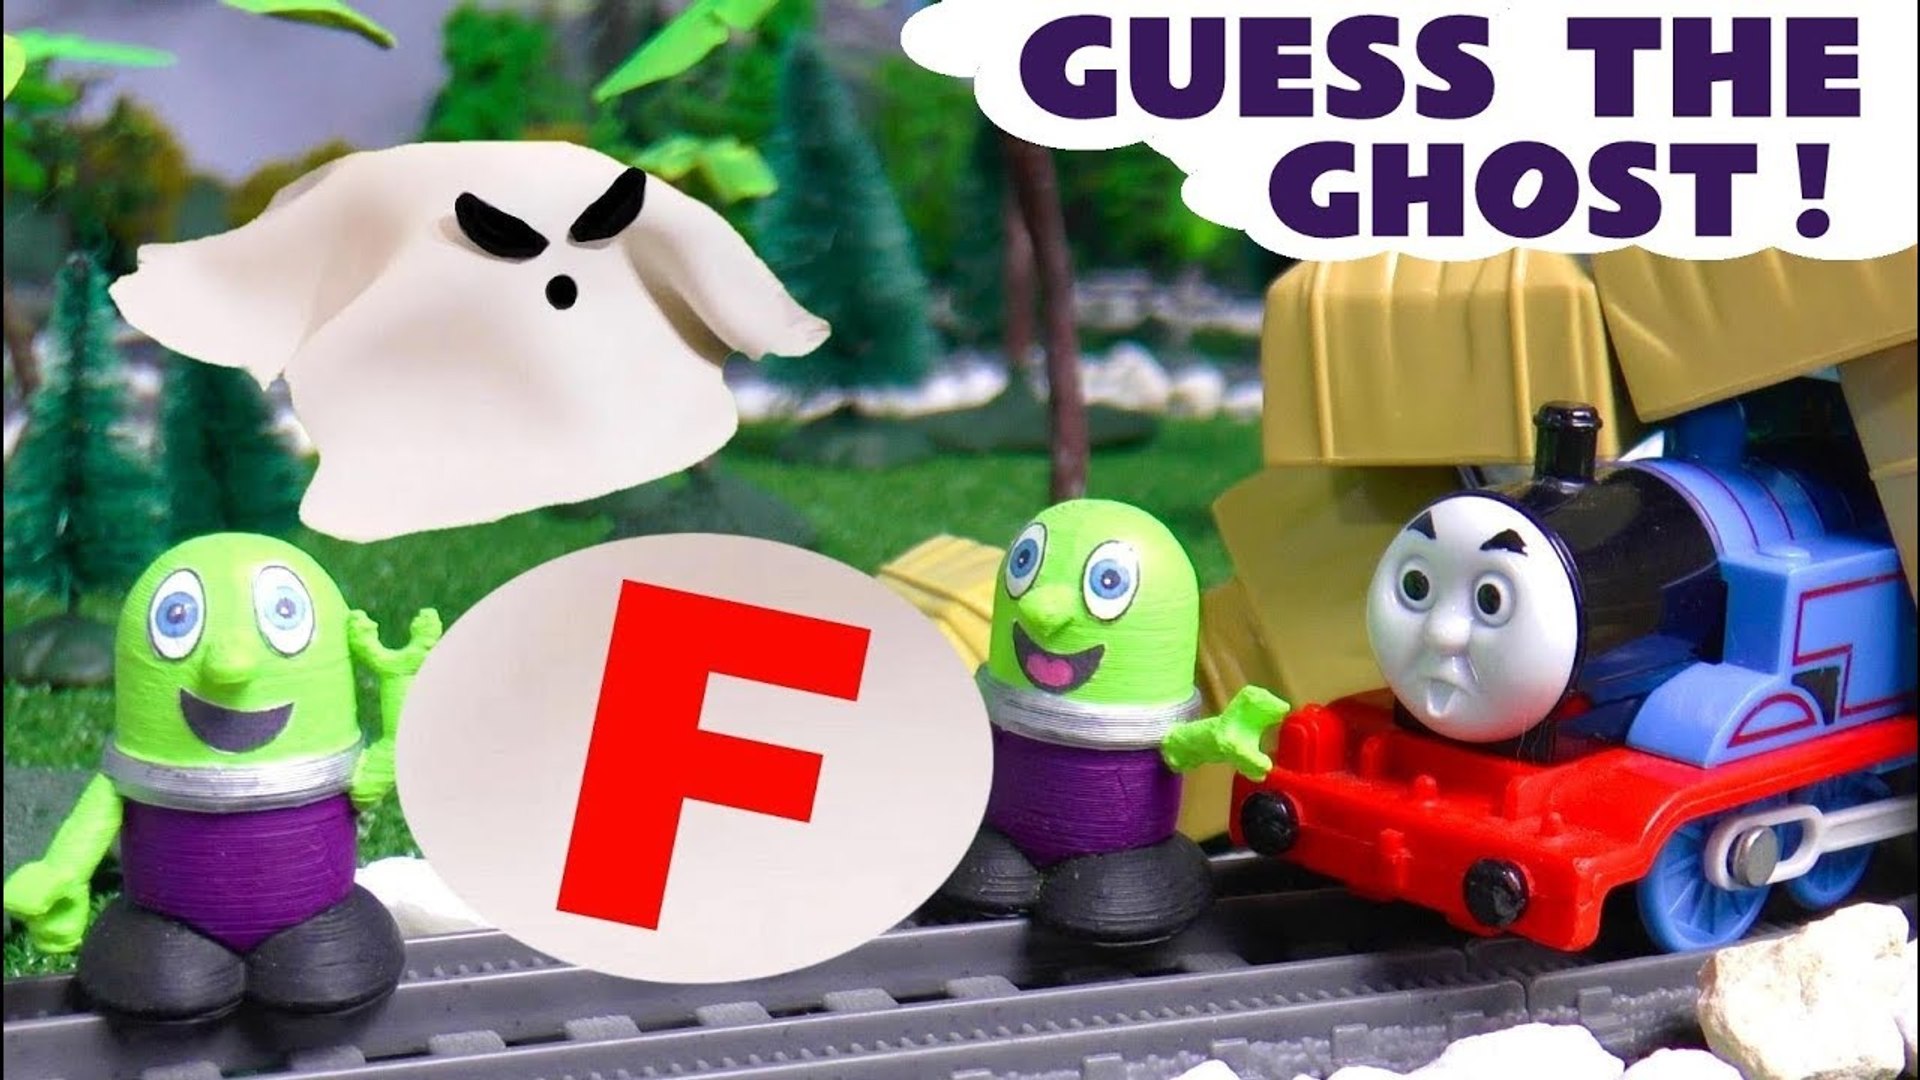 Thomas and Friends Learn English with Play Doh Game Guess the Ghost with  the Funny Funlings and Thomas the Tank Engine, learn letters in this  educational family friendly full episode English story